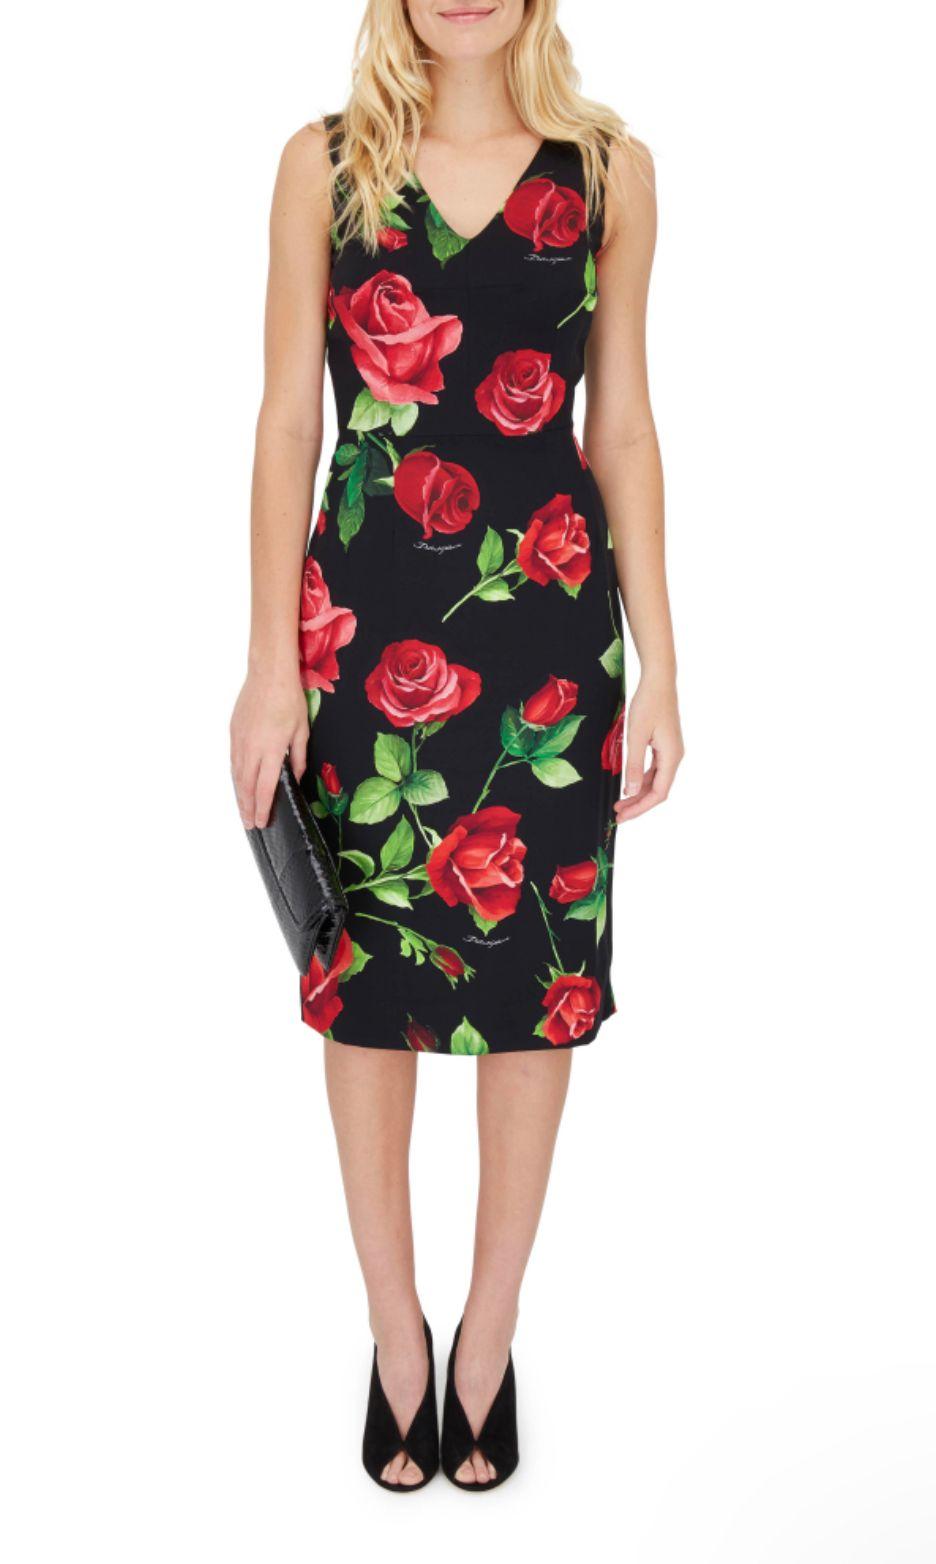 Gorgeous brand new with tags, 100% Authentic Dolce & Gabbana Rose print stretch silk sleeveless sheath dress featuring V neckline, rear central vent and zip closure, stretch silk satin lining.

Model: Sleeveless sheath

Color: Black

Zipper closure